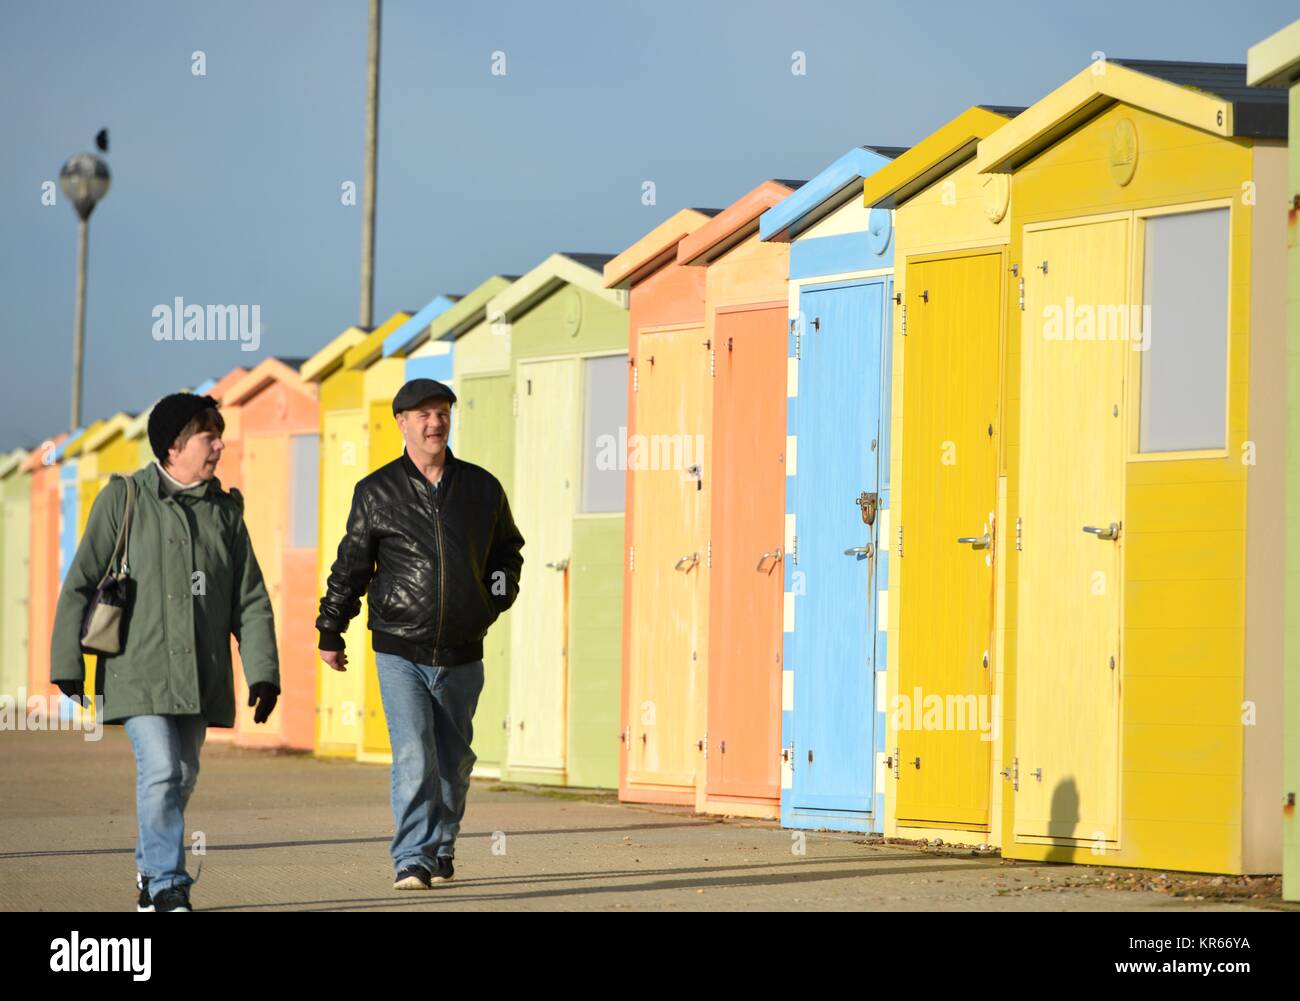 Seaford, East Sussex, UK. 19th Dec, 2017. People enjoying bright winter sunshine on Seaford beach, Eas Sussex. Credit: Peter Cripps/Alamy Live News Stock Photo